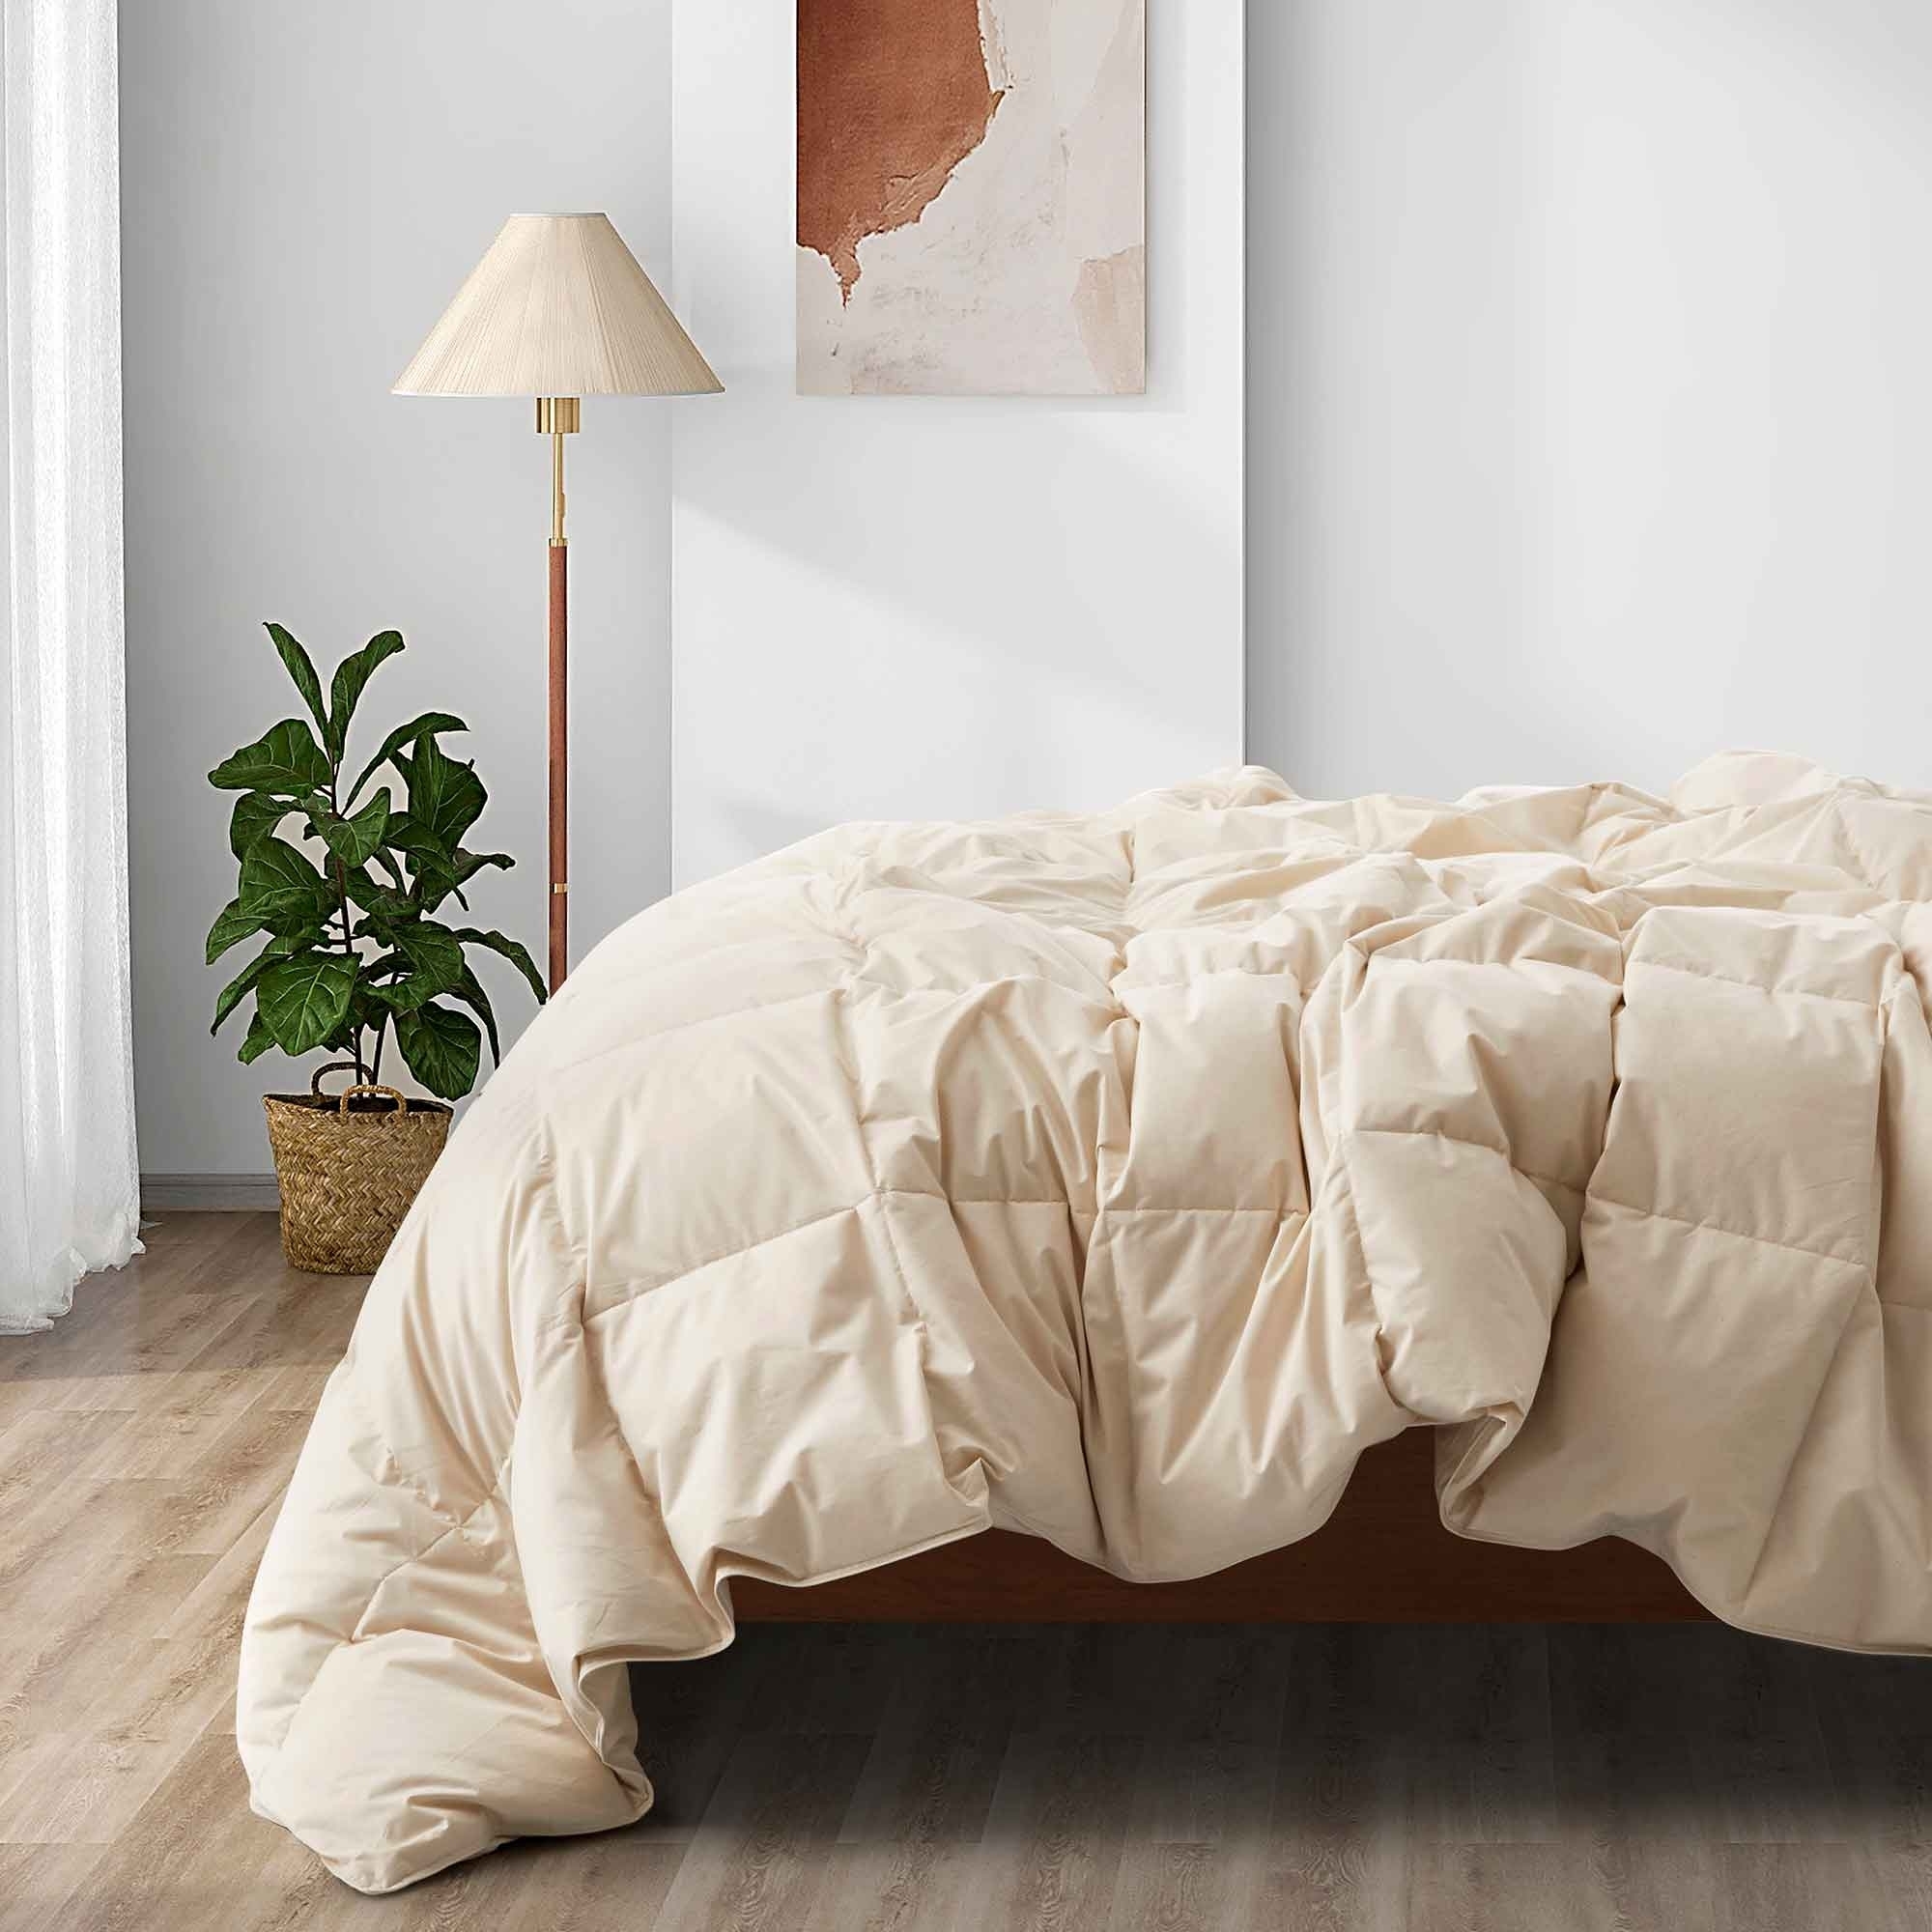 All Season Organic Cotton Comforter Filled With Down And Feather Fiber - Off White, King